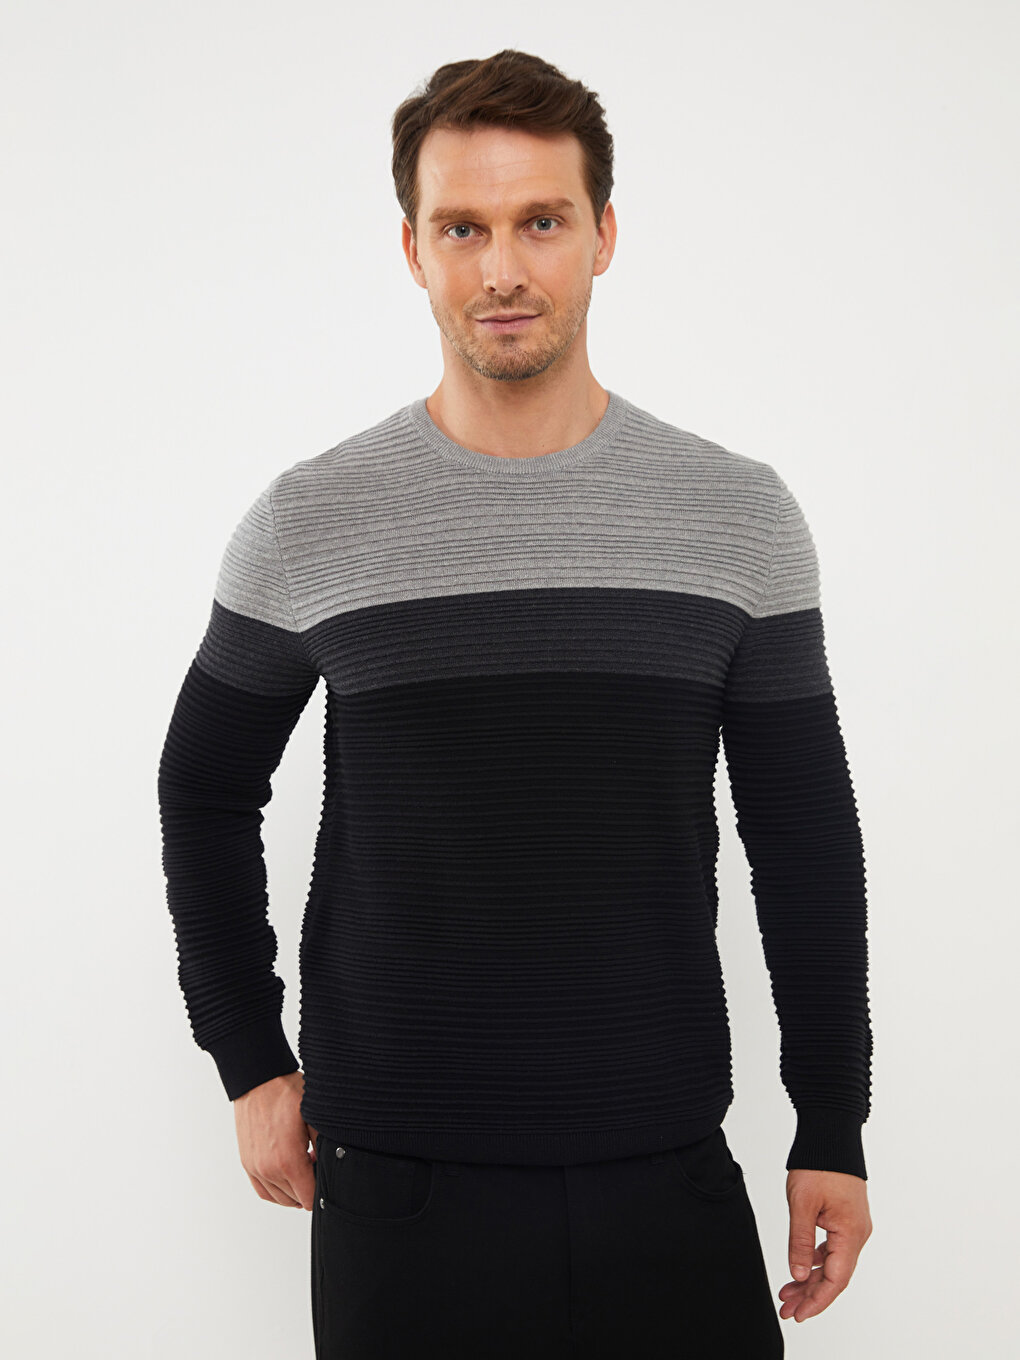 Crew Neck Long Sleeve Men's Tricot Sweater with Color Block -W31110Z8 ...